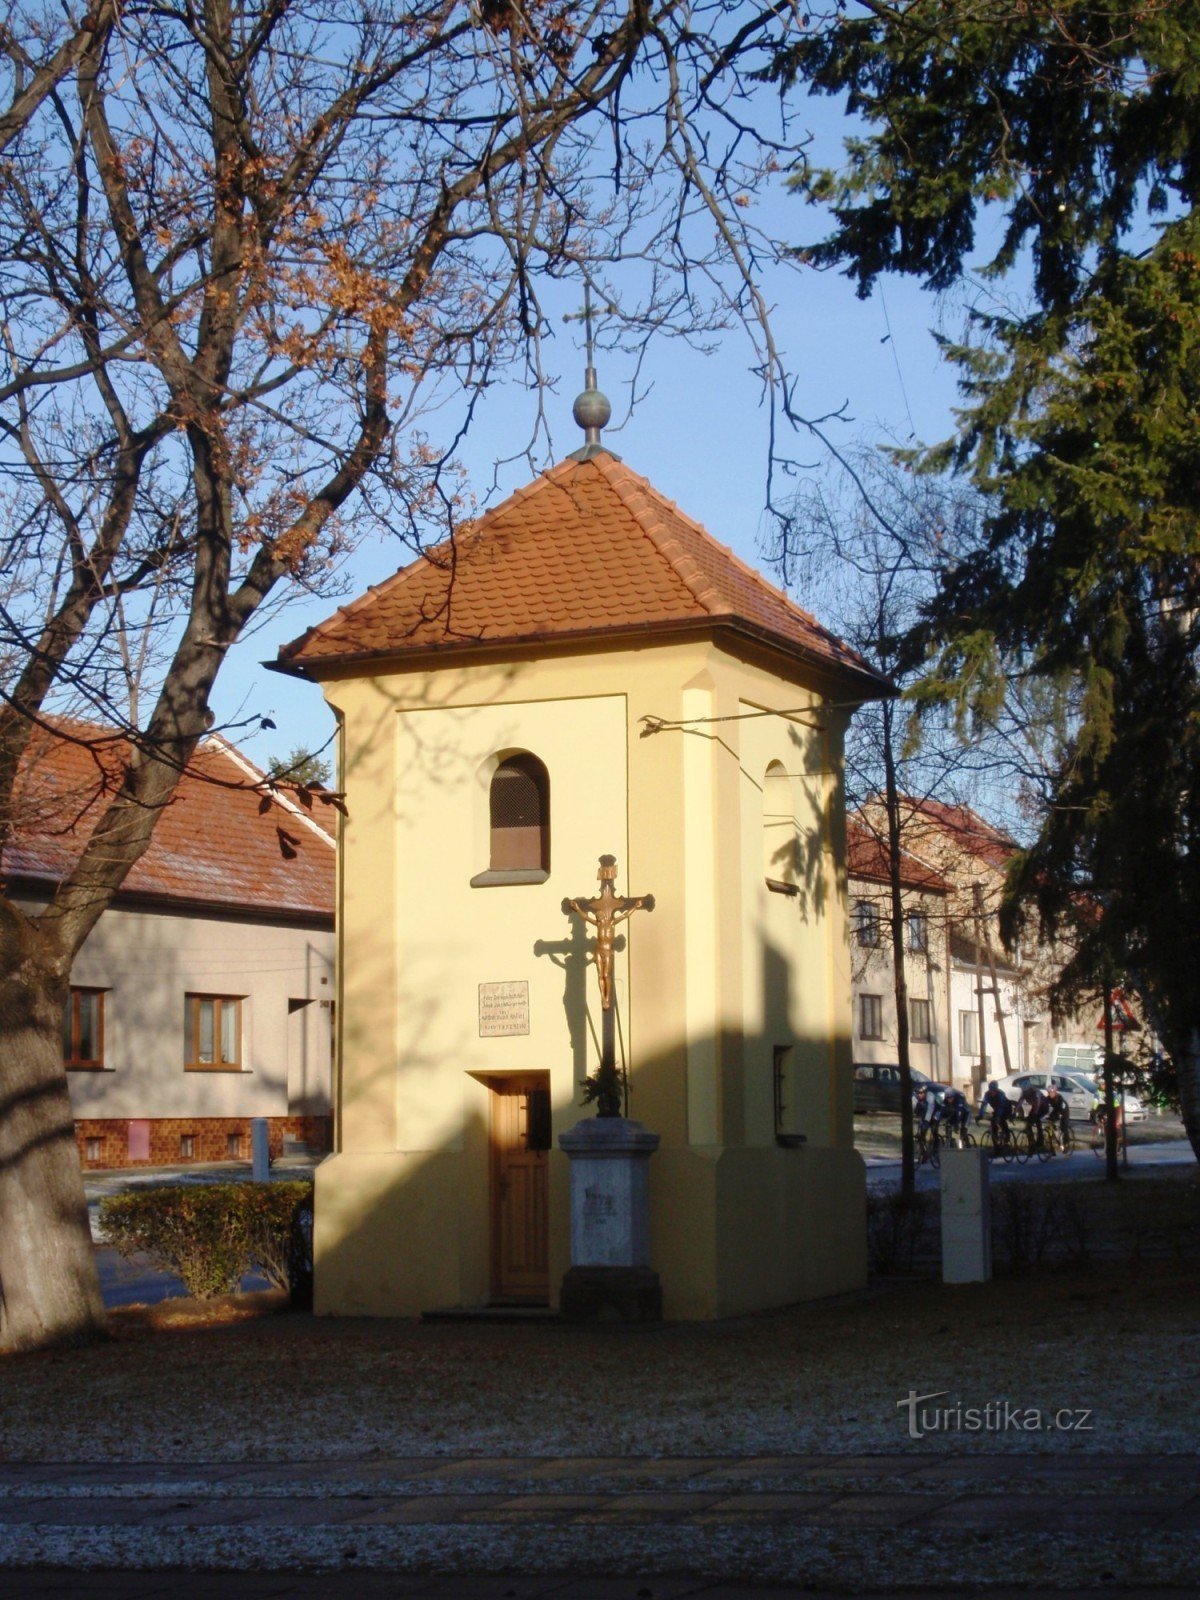 Church monuments of the village of Kobylnice